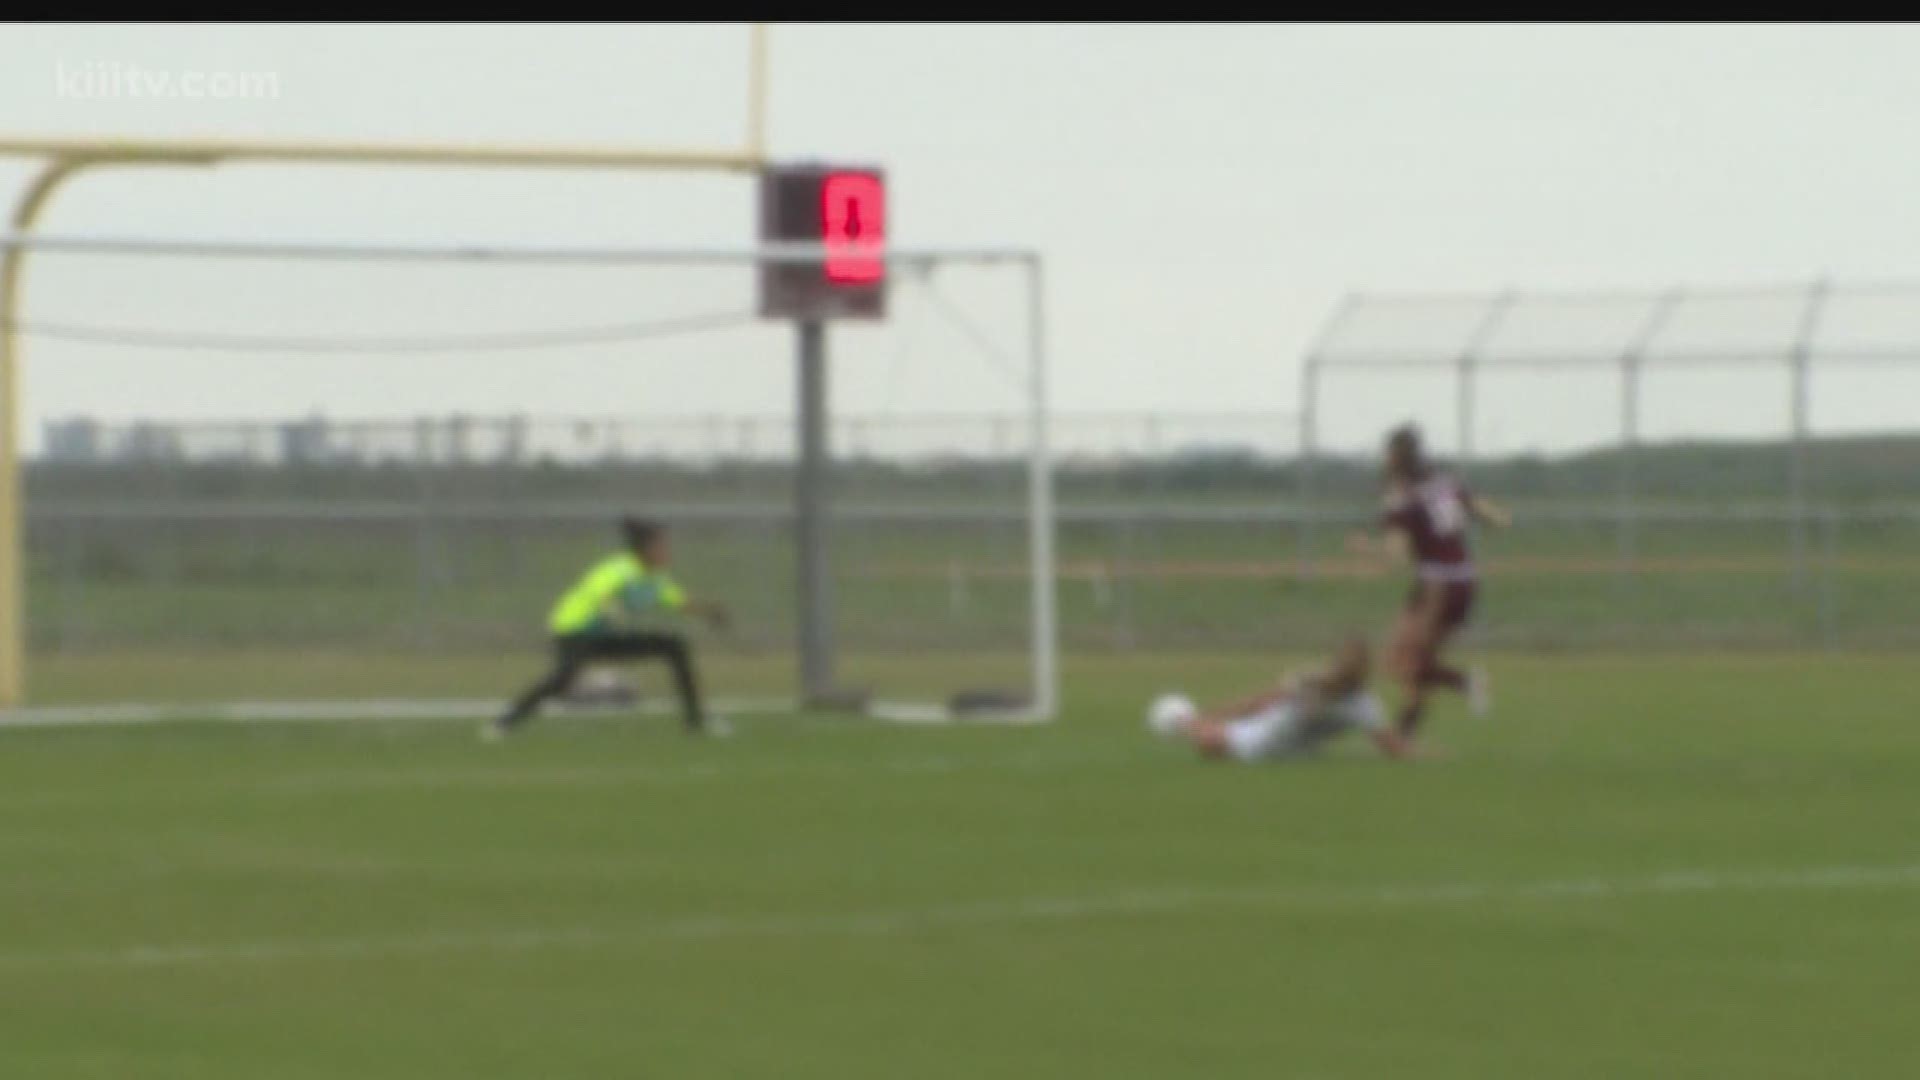 London girls soccer is headed to the Region Semifinals after a win over La Feria 2-1. 